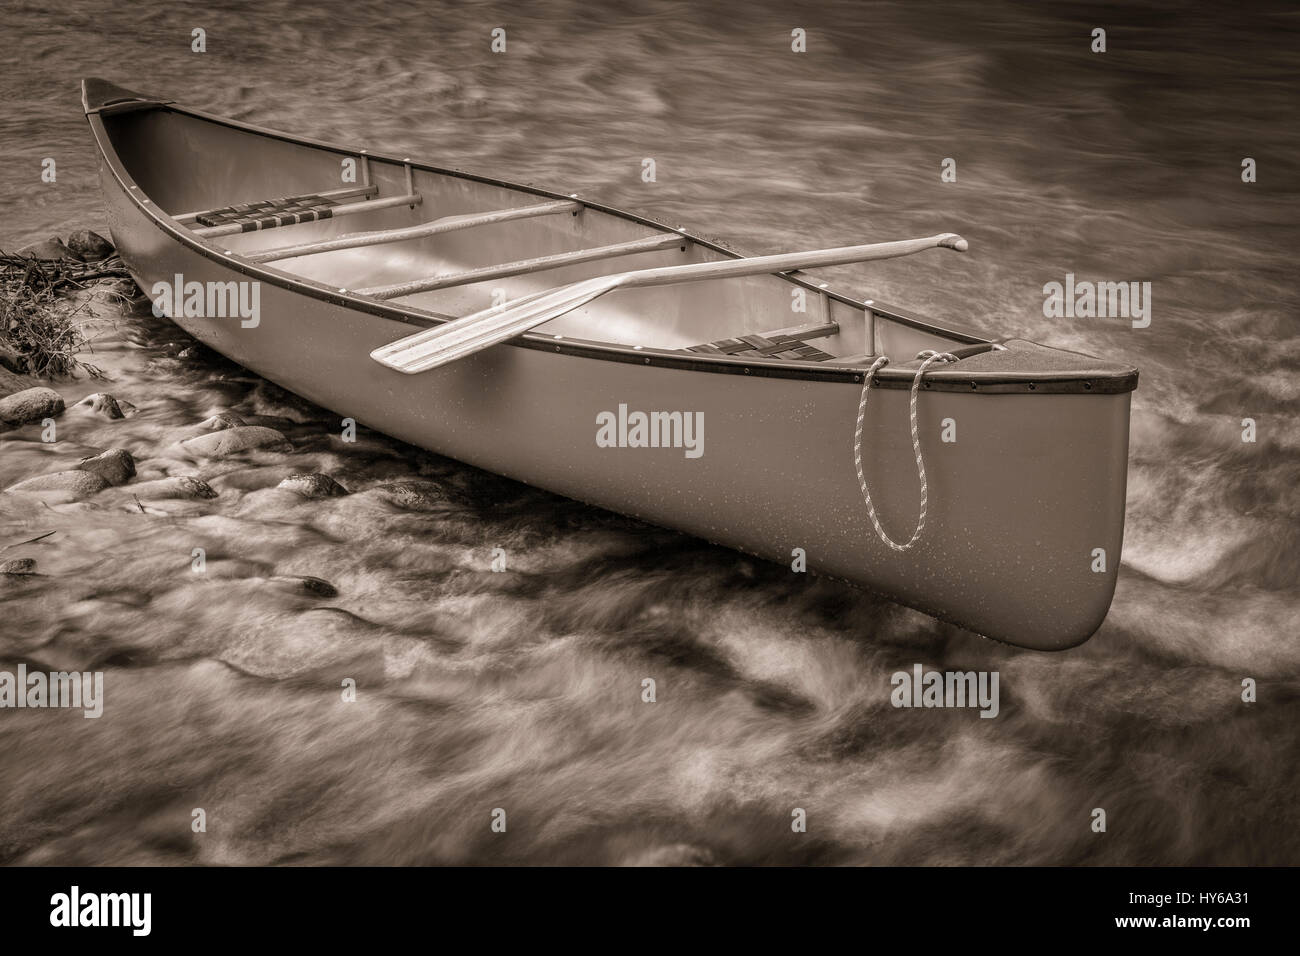 canoe with a paddle on s shore of shallow and rocky river, retro sepia toning Stock Photo